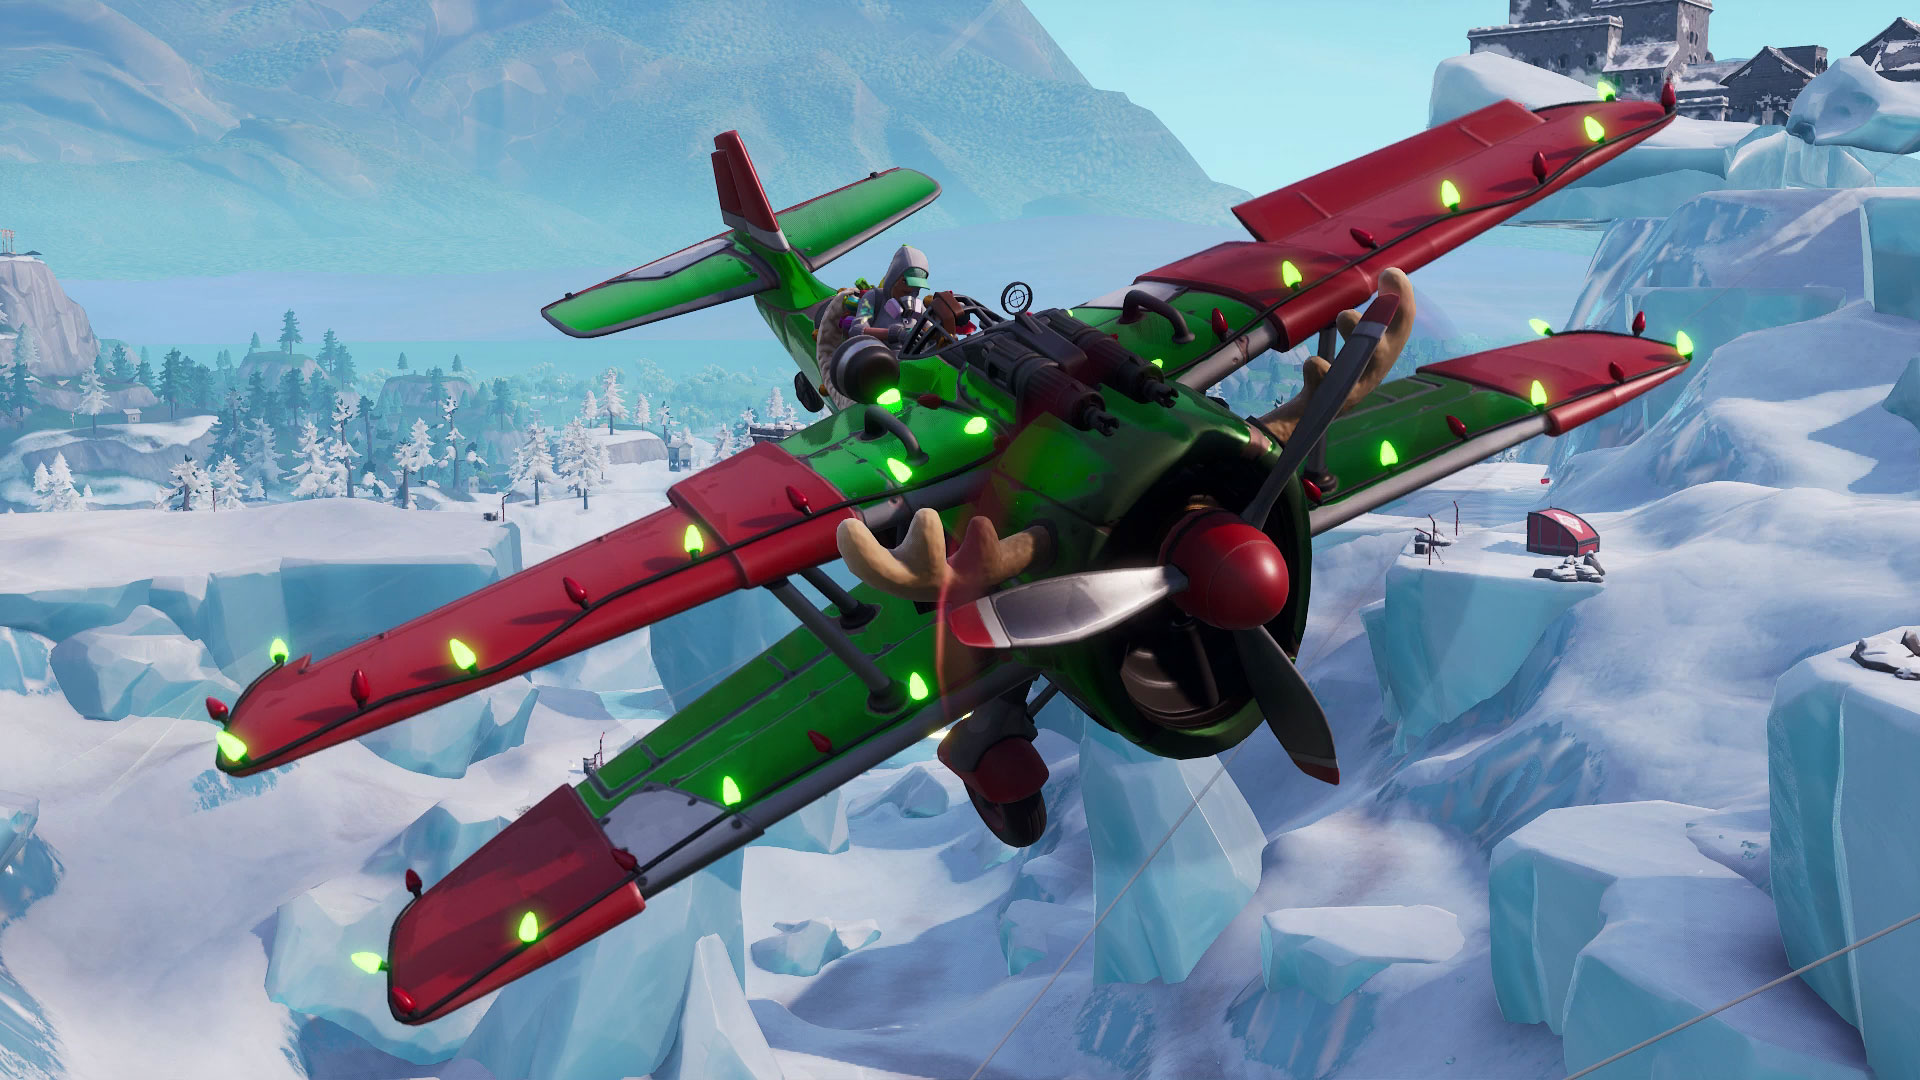 How To Get An Airplane In Fortnite Where To Find A Fortnite Plane And Take To The Skies For Aerial Combat Gamesradar